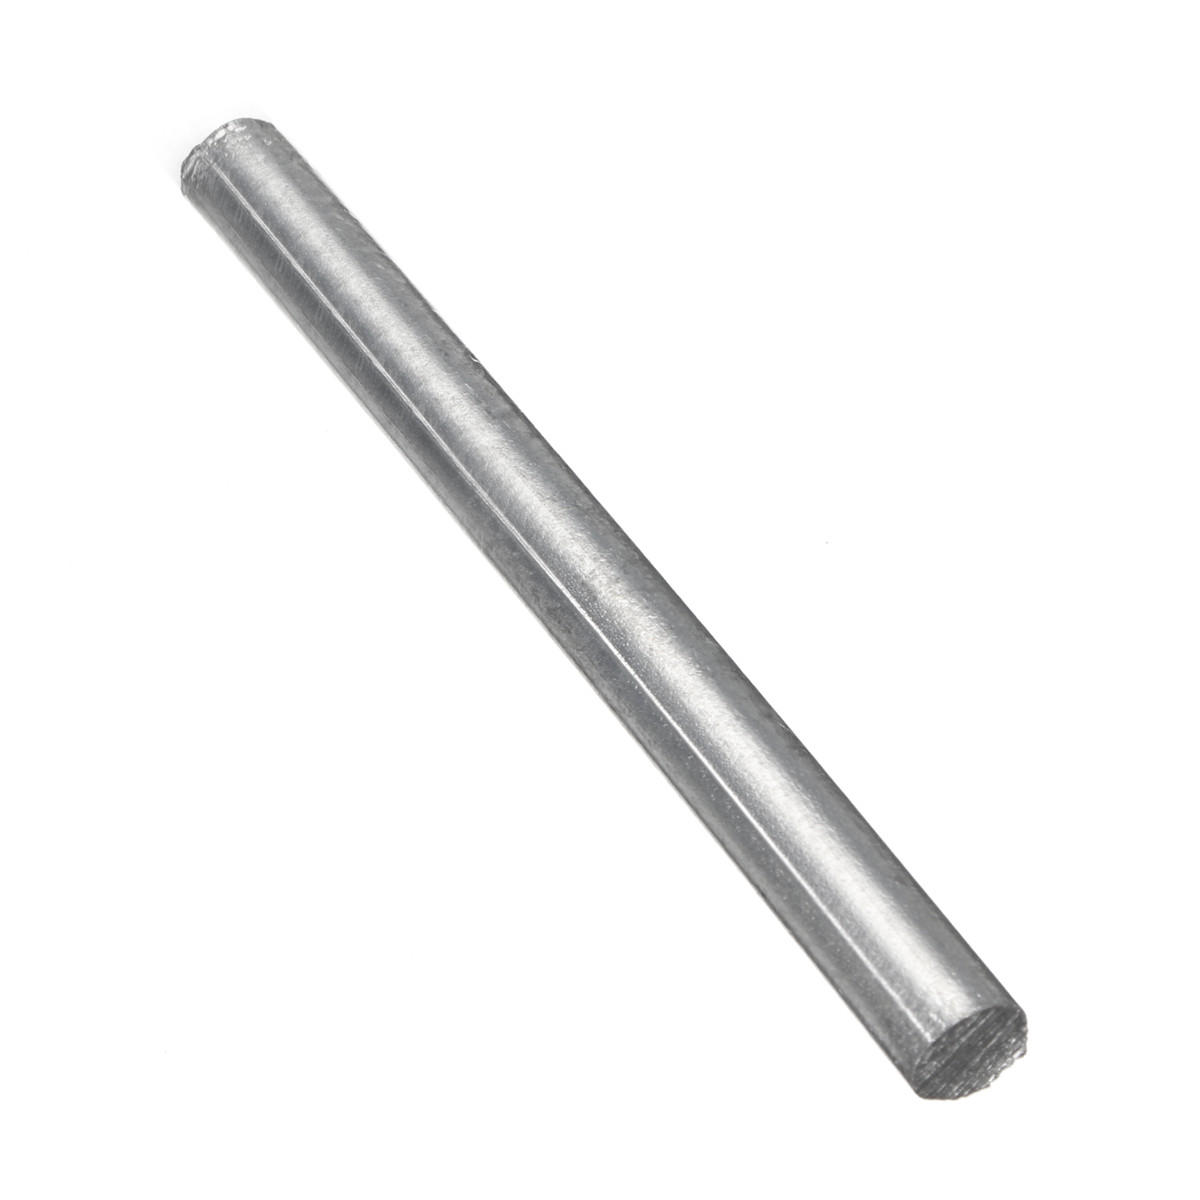 04 inch x 4 inch High Purity Zn 9995 Zinc Metal Rod Anode Electroplating Solid Round Bar